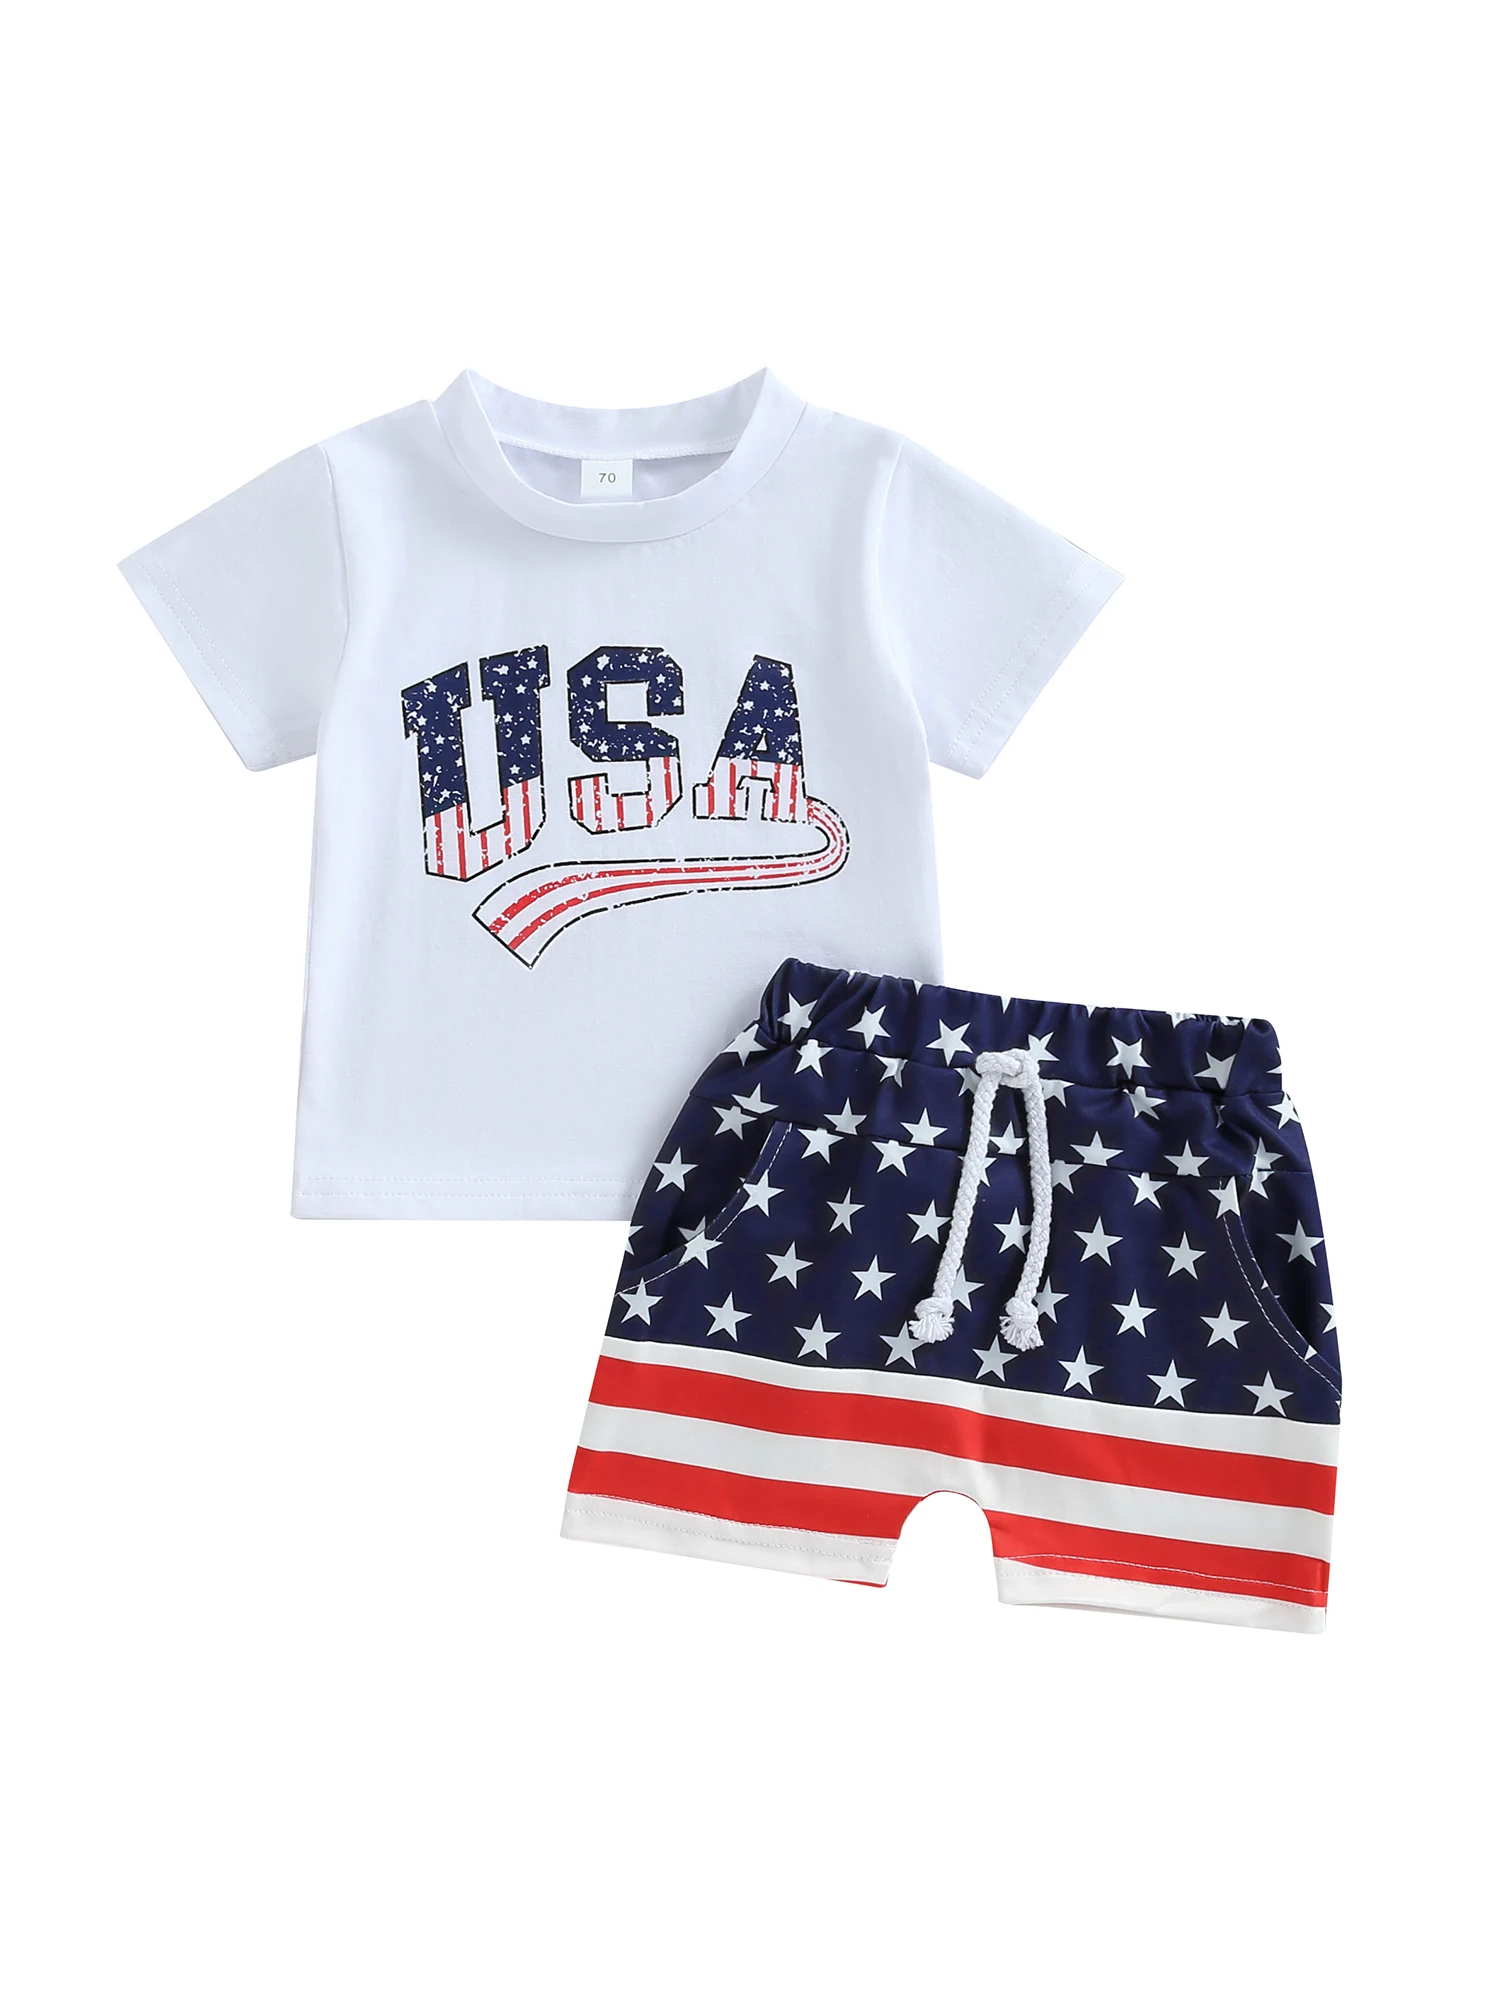 

Toddler 4th of July Baby Boy Outfit USA Short Sleeve T Shirt Tops Fourth of July Shorts Independence Day Summer Clothes